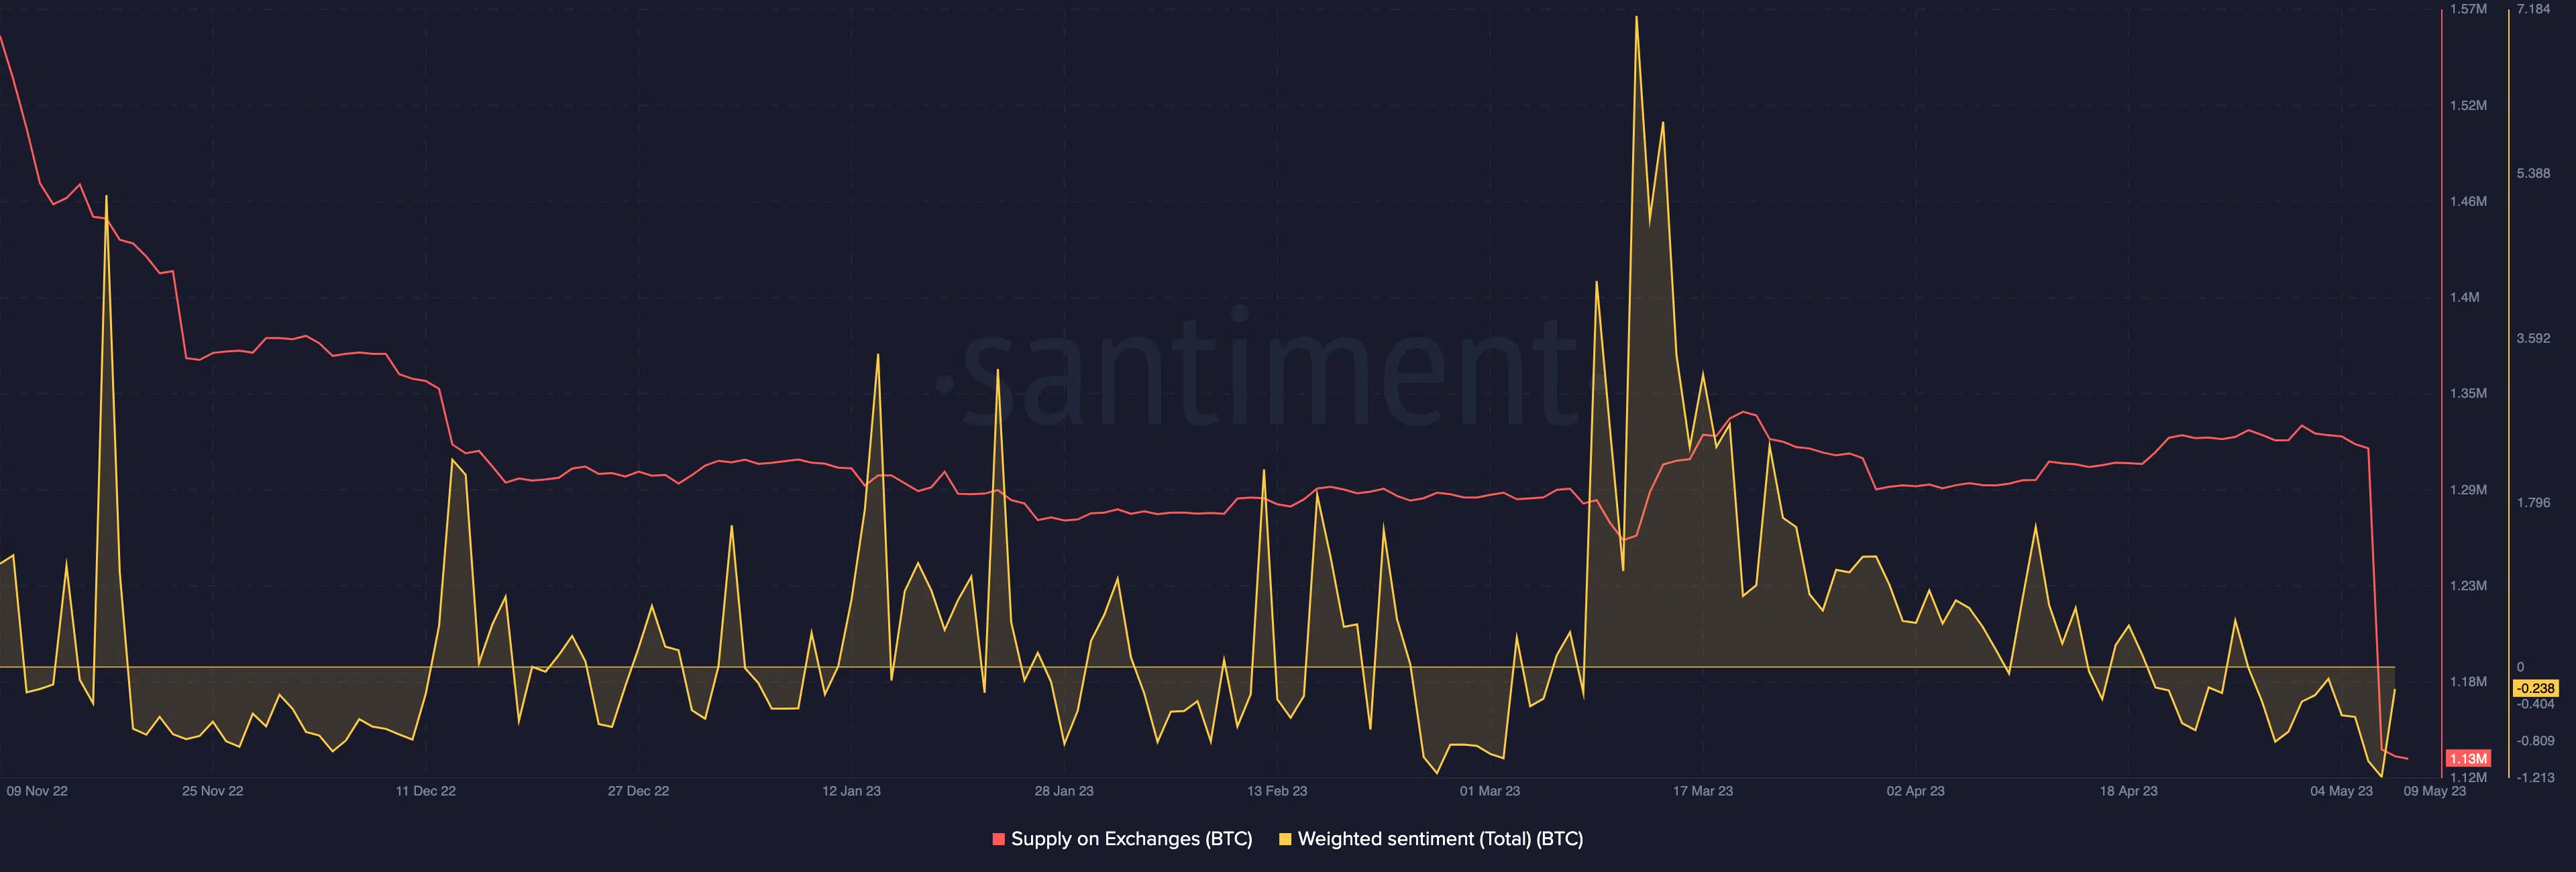 Bitcoin supply on exchanges and BTC weighted sentiment